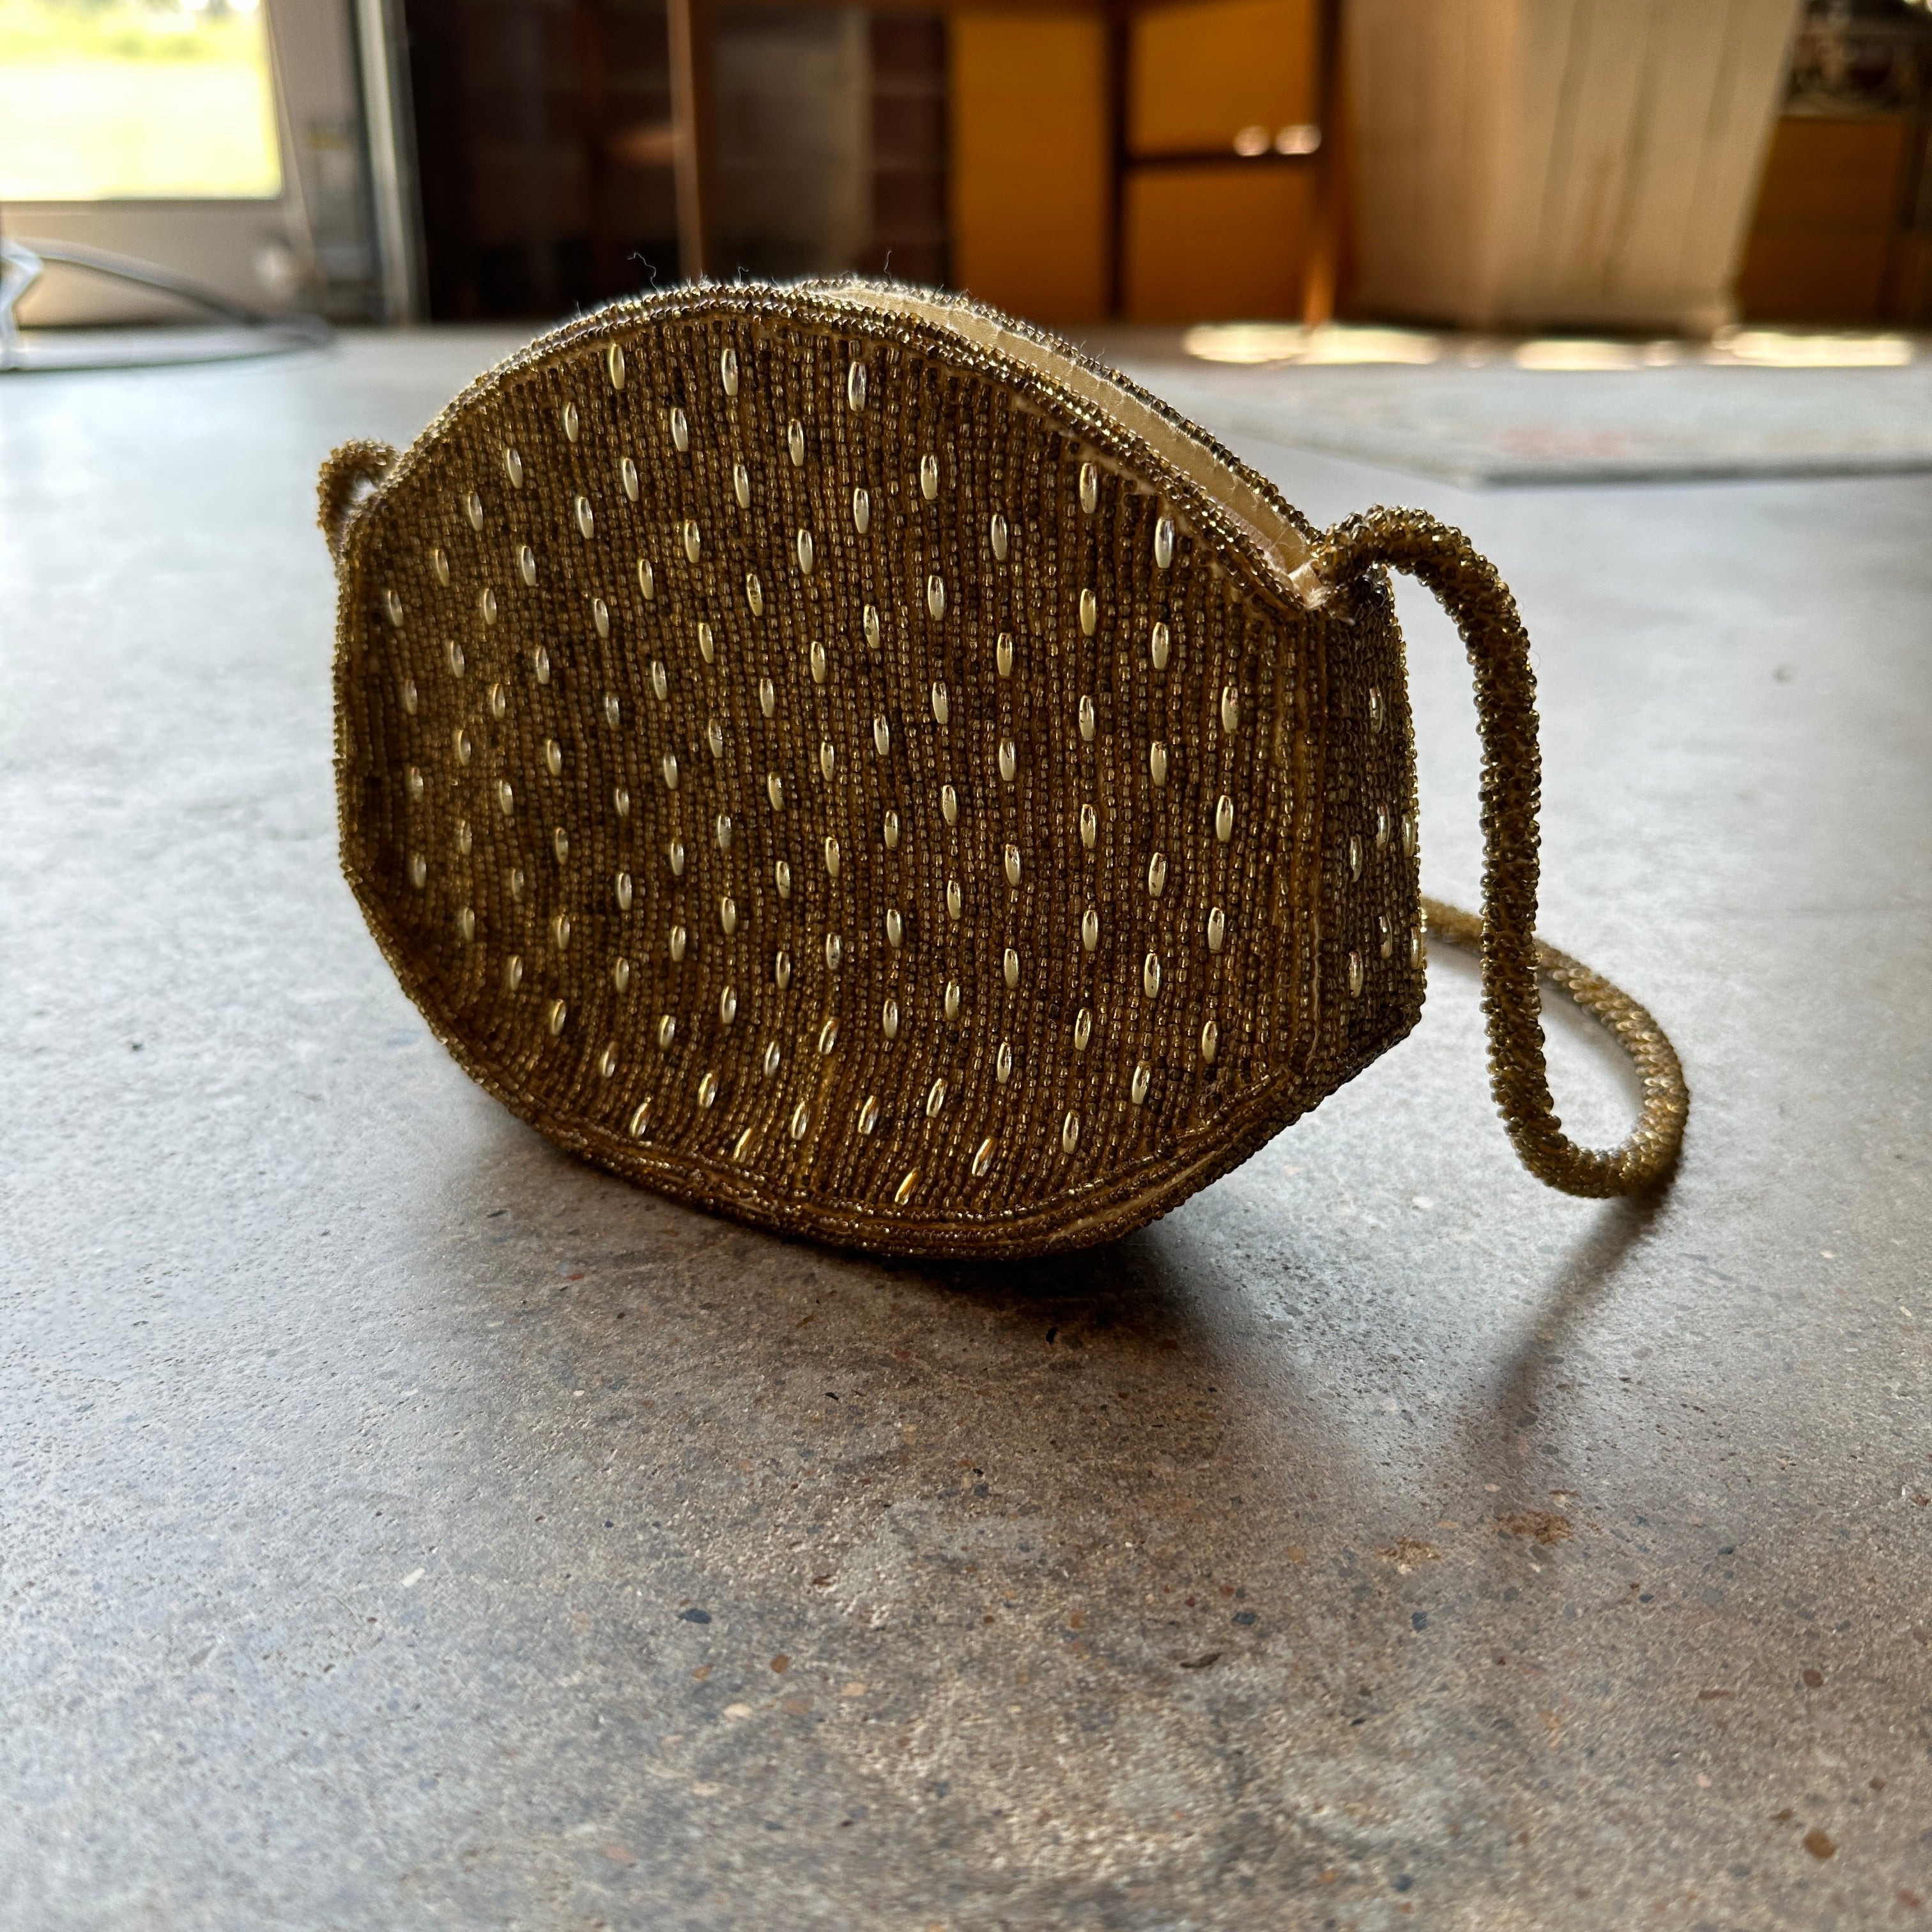 Vintage Gold/Champagne Beaded Handmade Purse